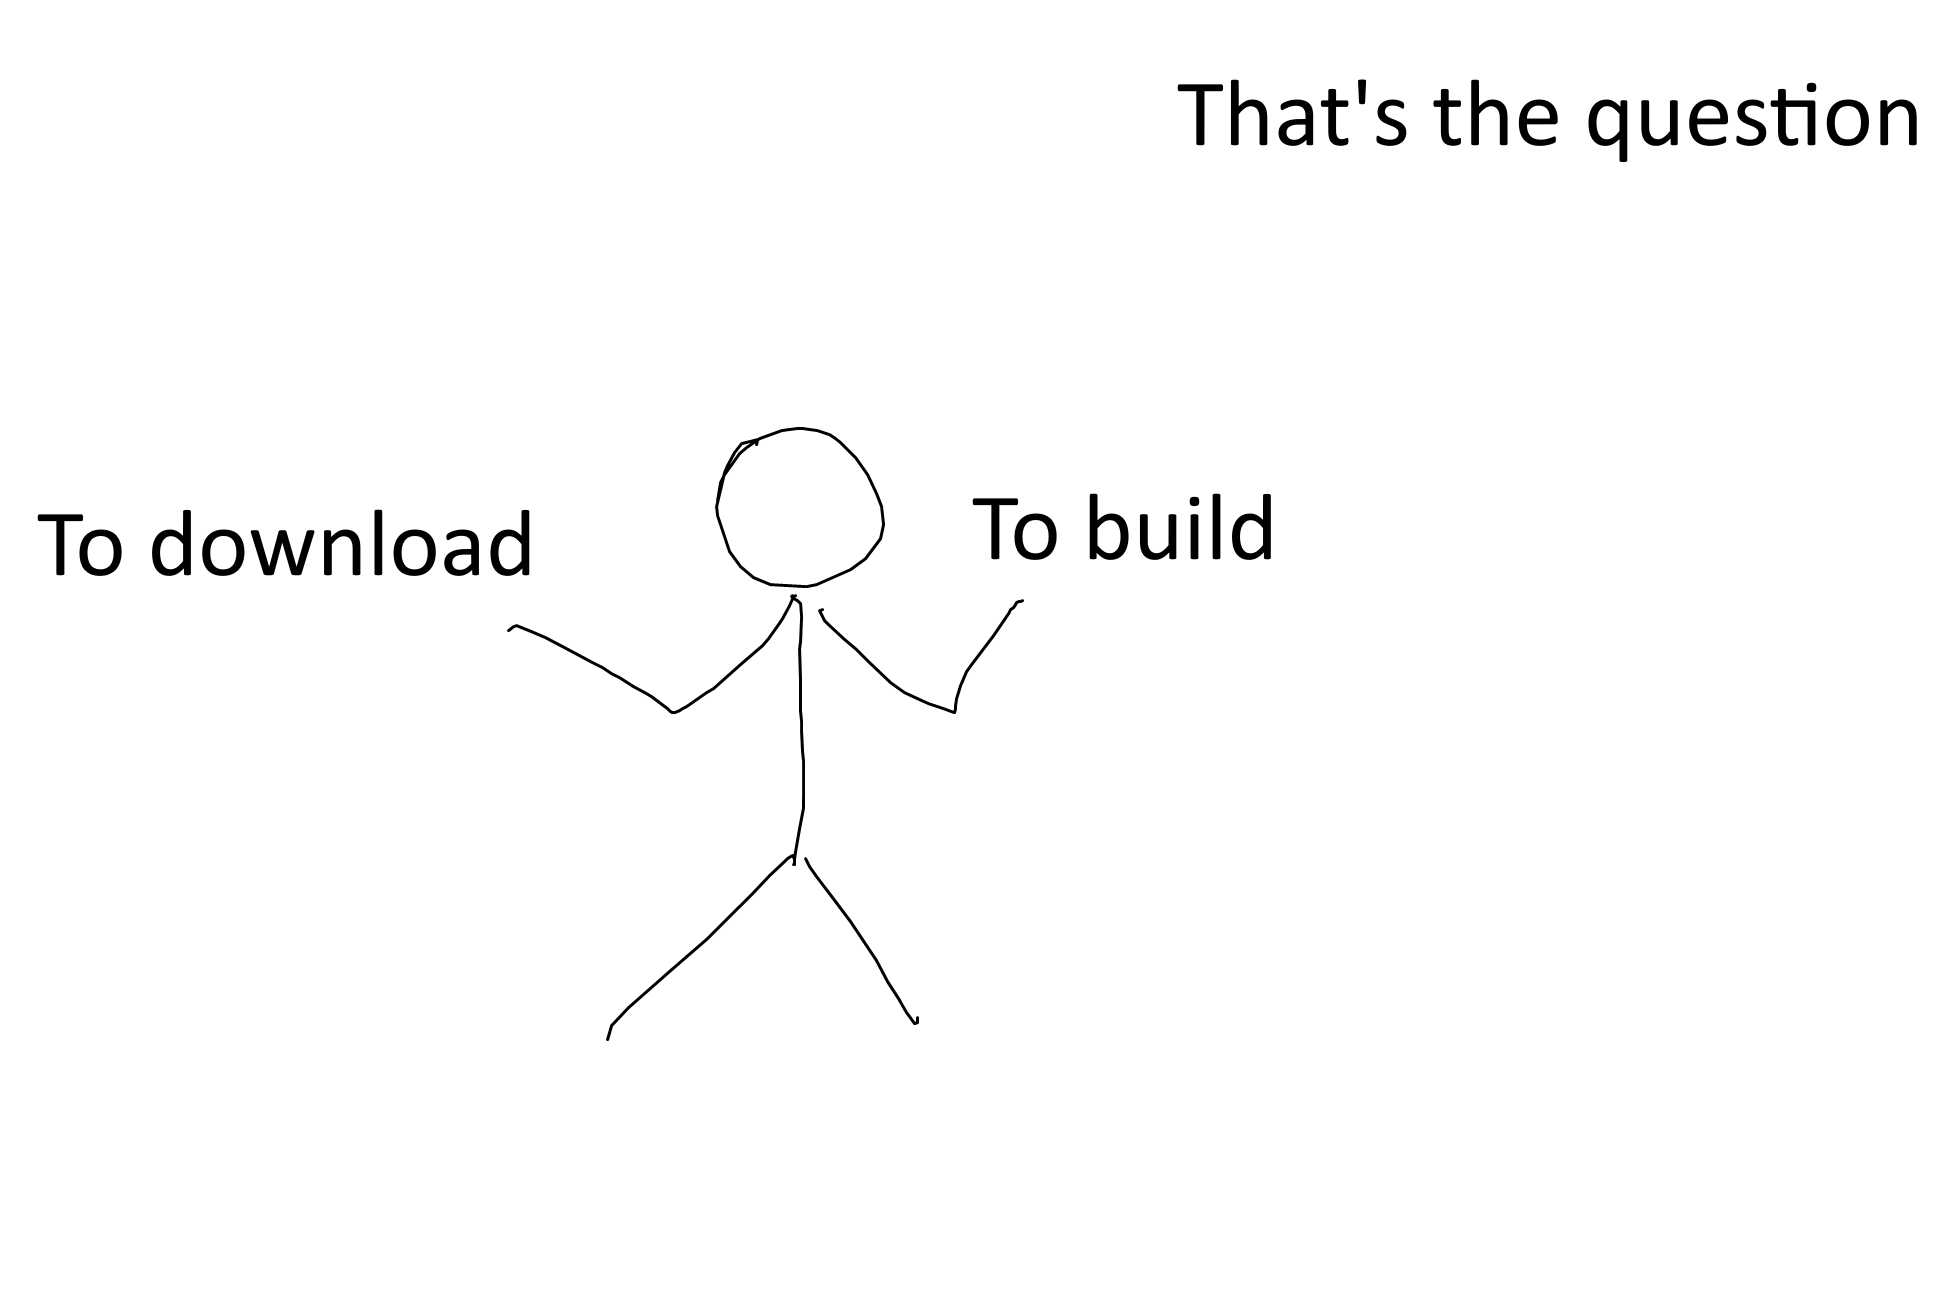 An illustration about choosing between building or downloading applications